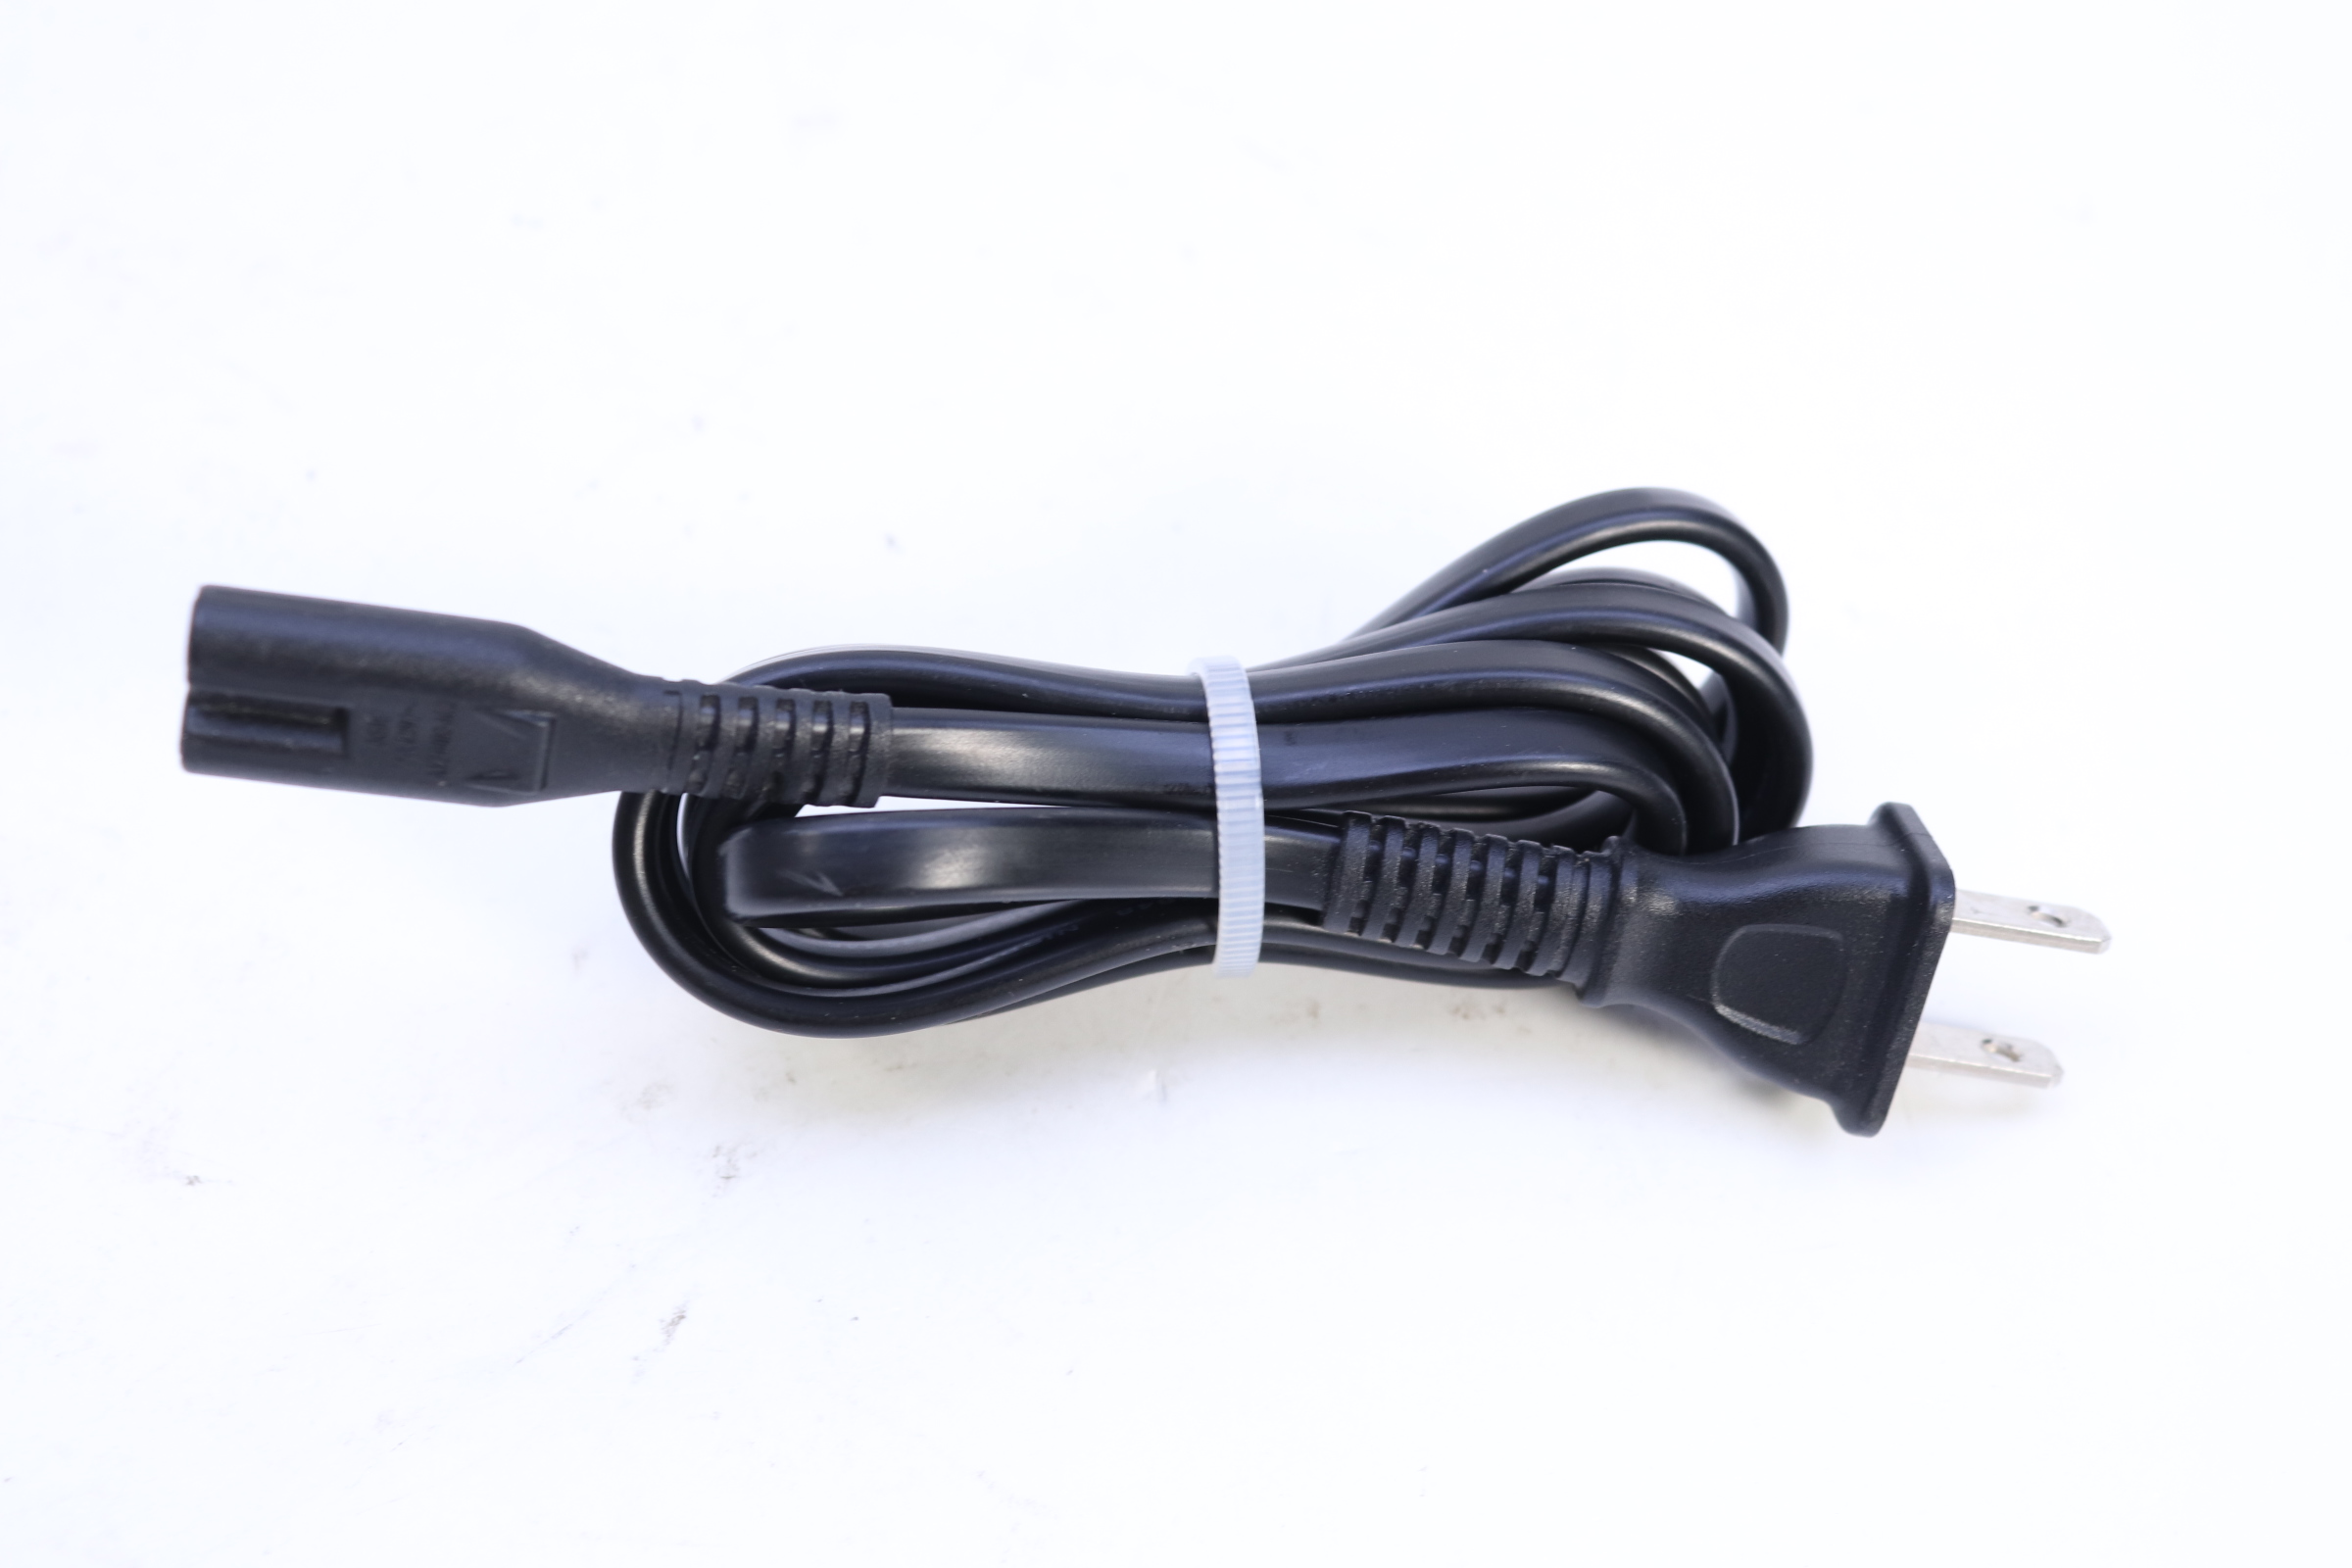 Electric Power Cable Cord Plug for PlayStation 4 PS4 CUH-2215B Console  System